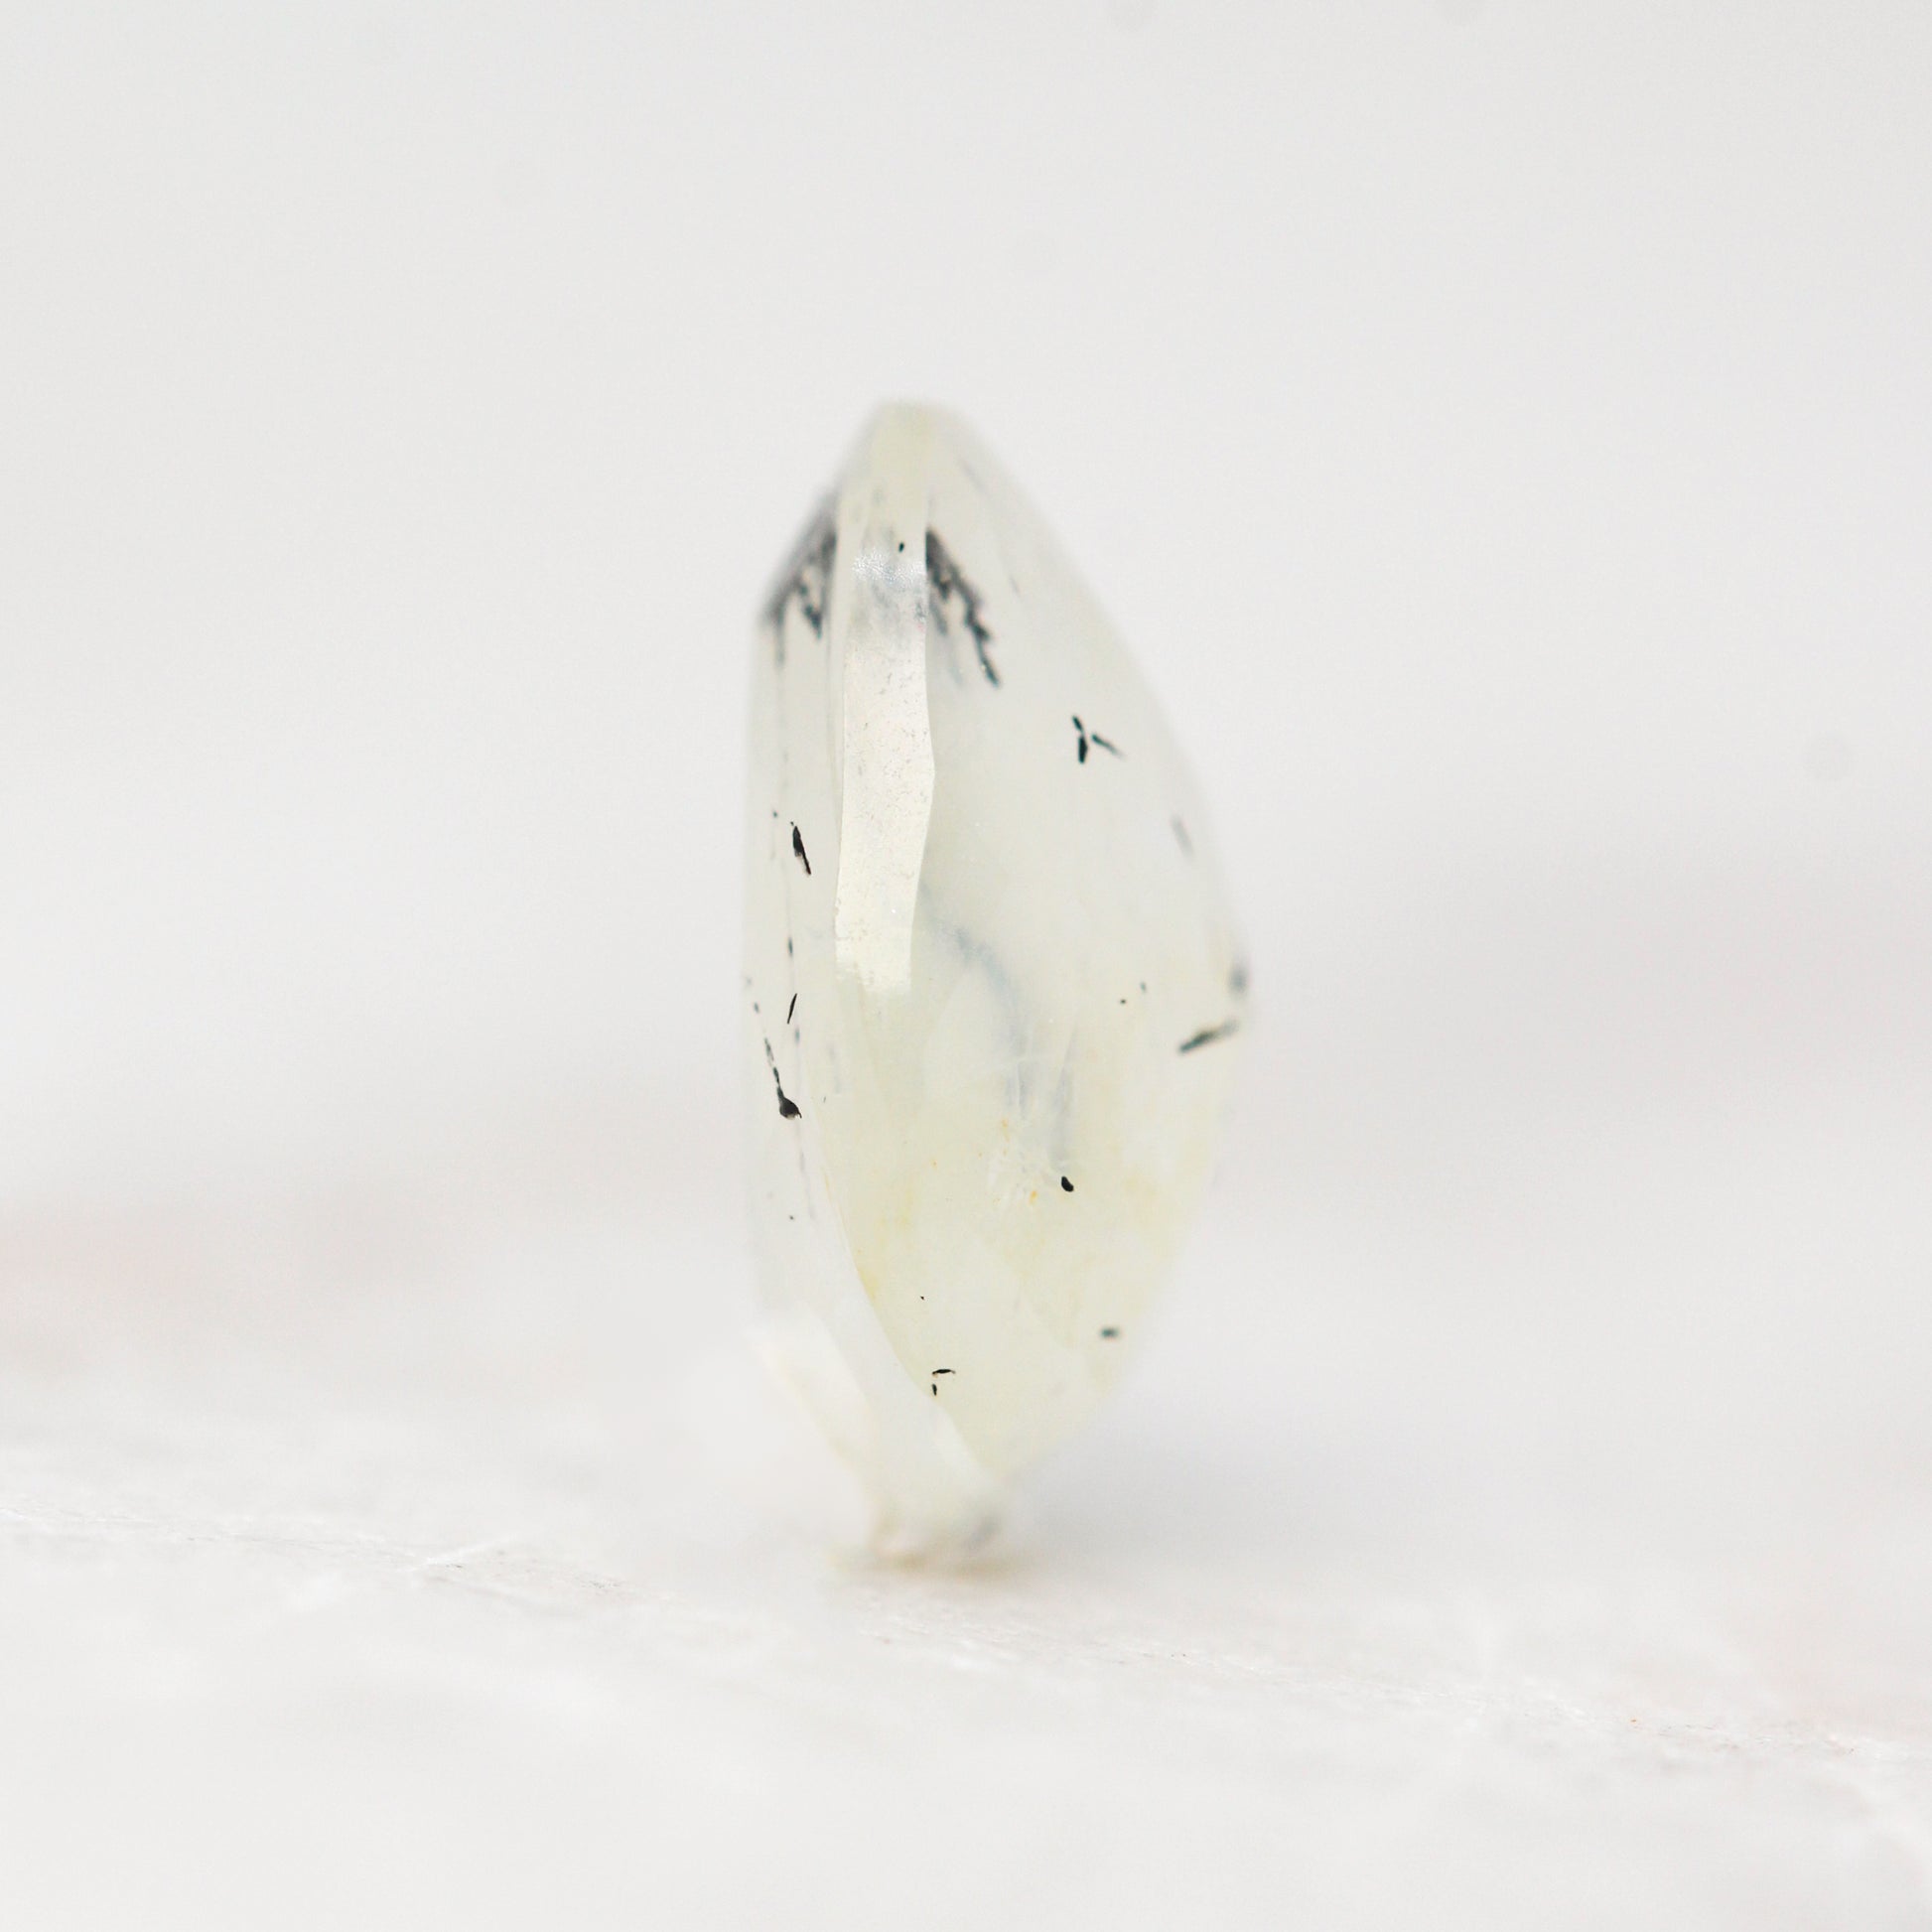 2.29 Carat Pear Dendritic Quartz for Custom Work - Inventory Code DQP229 - Midwinter Co. Alternative Bridal Rings and Modern Fine Jewelry